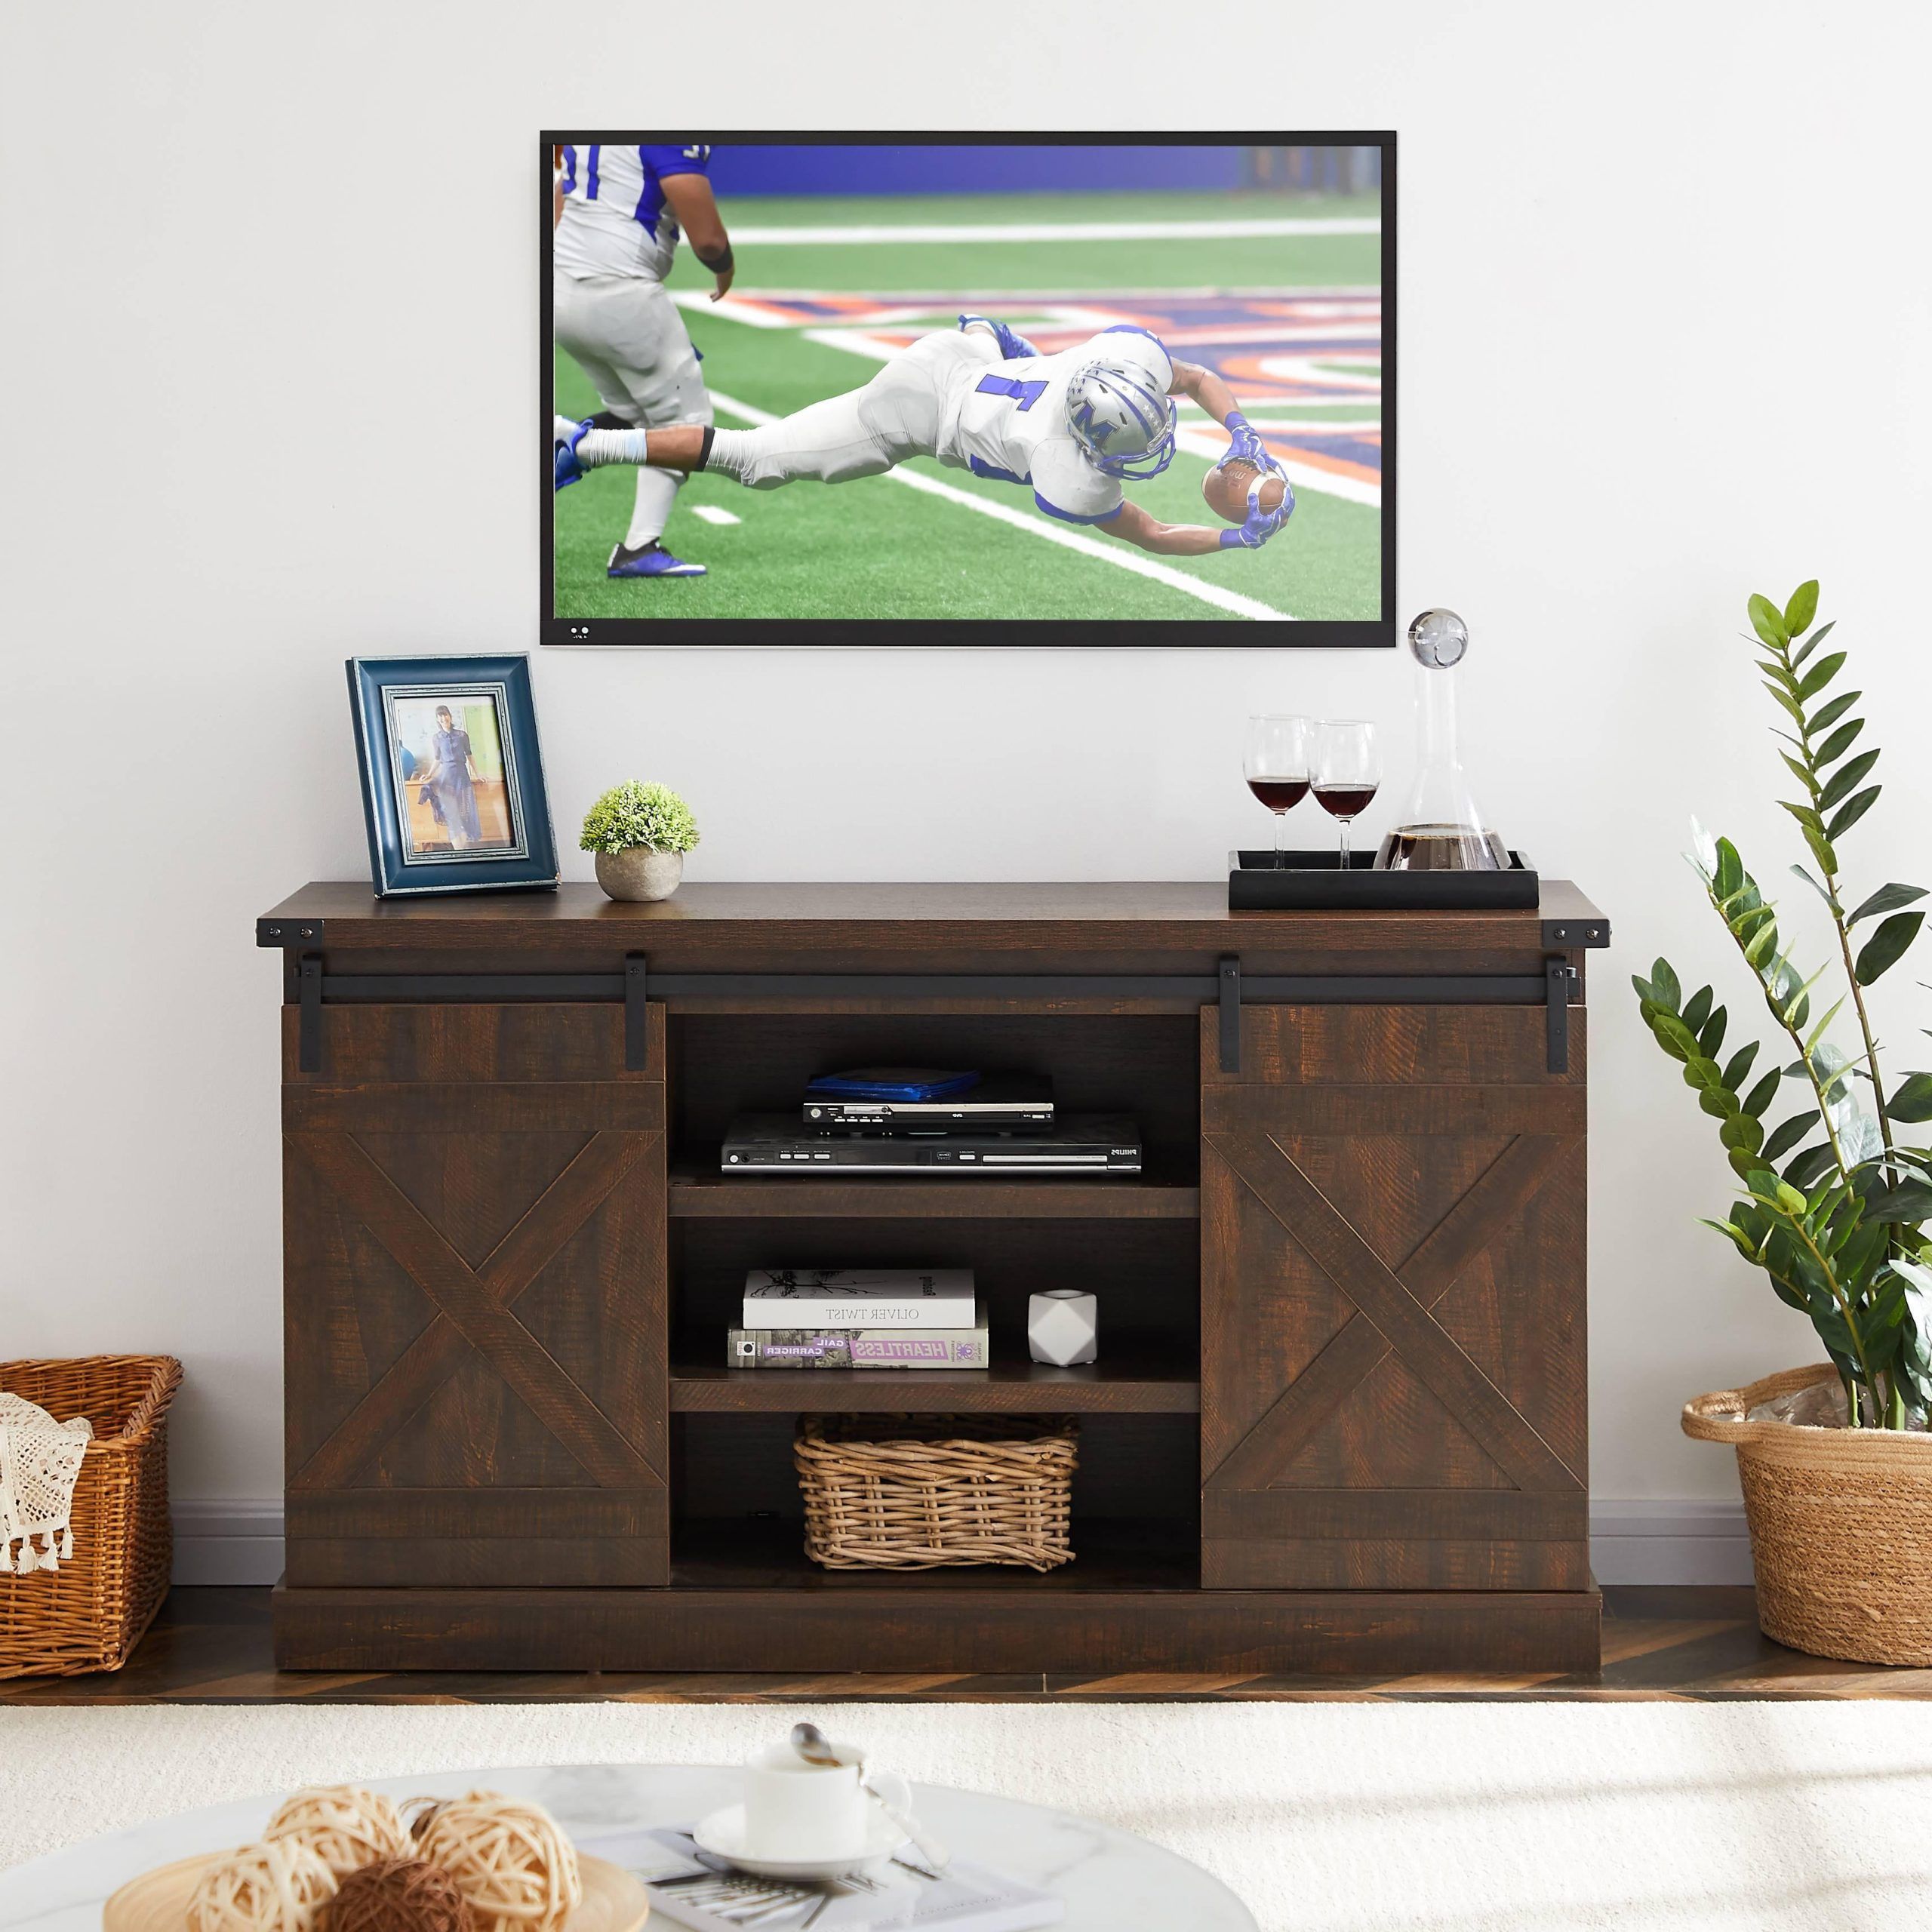 Sliding Barn Door Tv Cabinet With Storage Space And Shelf, Modern Intended For Well Known Dual Use Storage Cabinet Tv Stands (View 12 of 15)